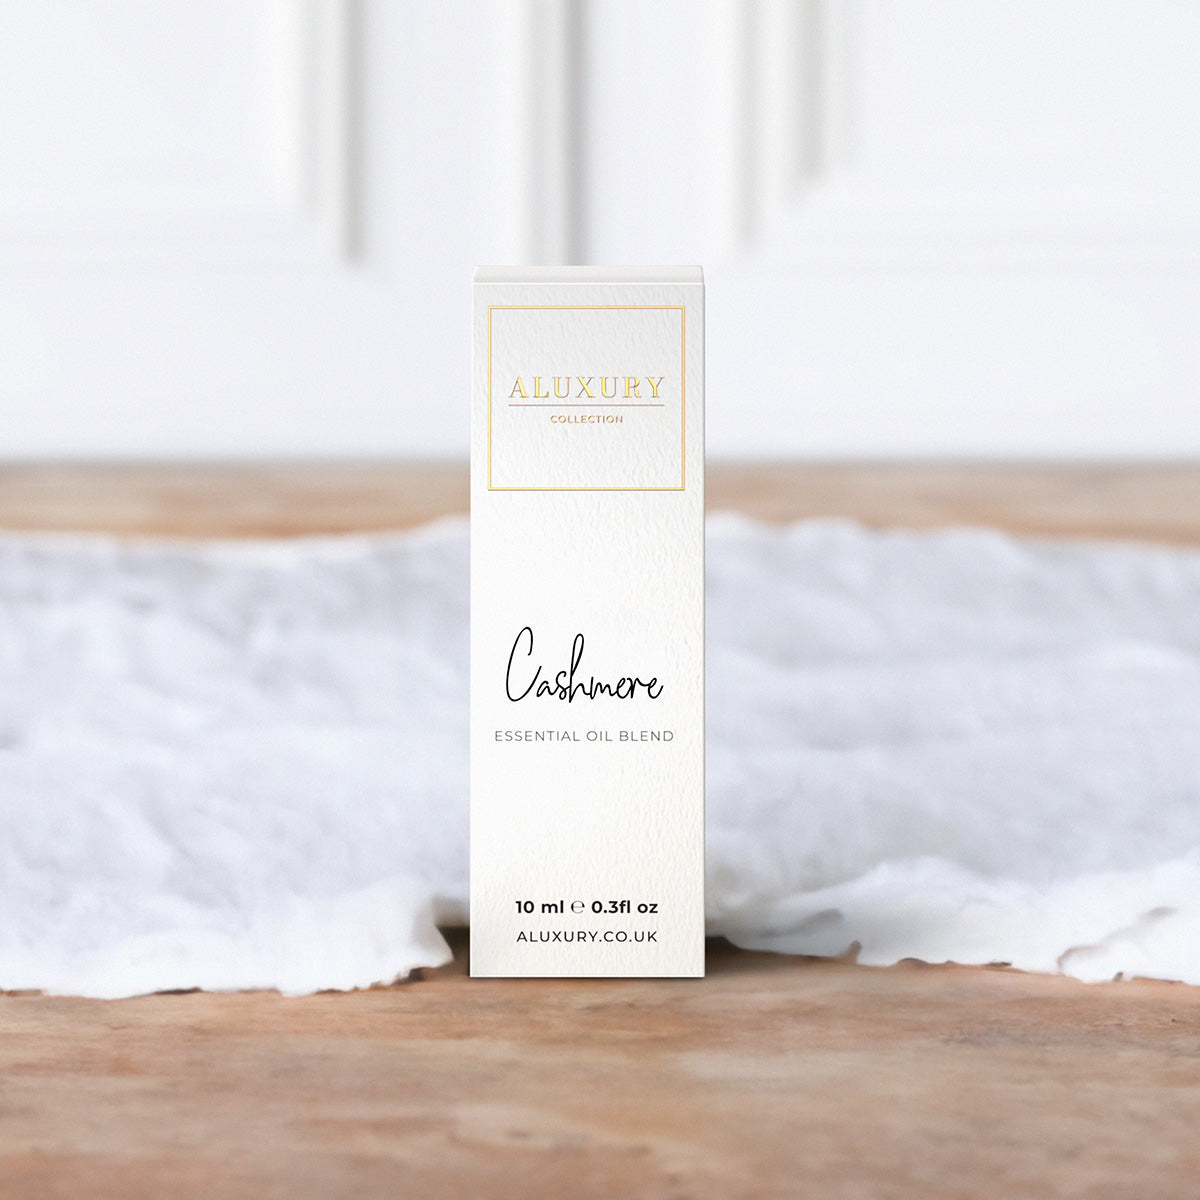 Cashmere - 10ml Essential Oil Blend Box by Aluxury